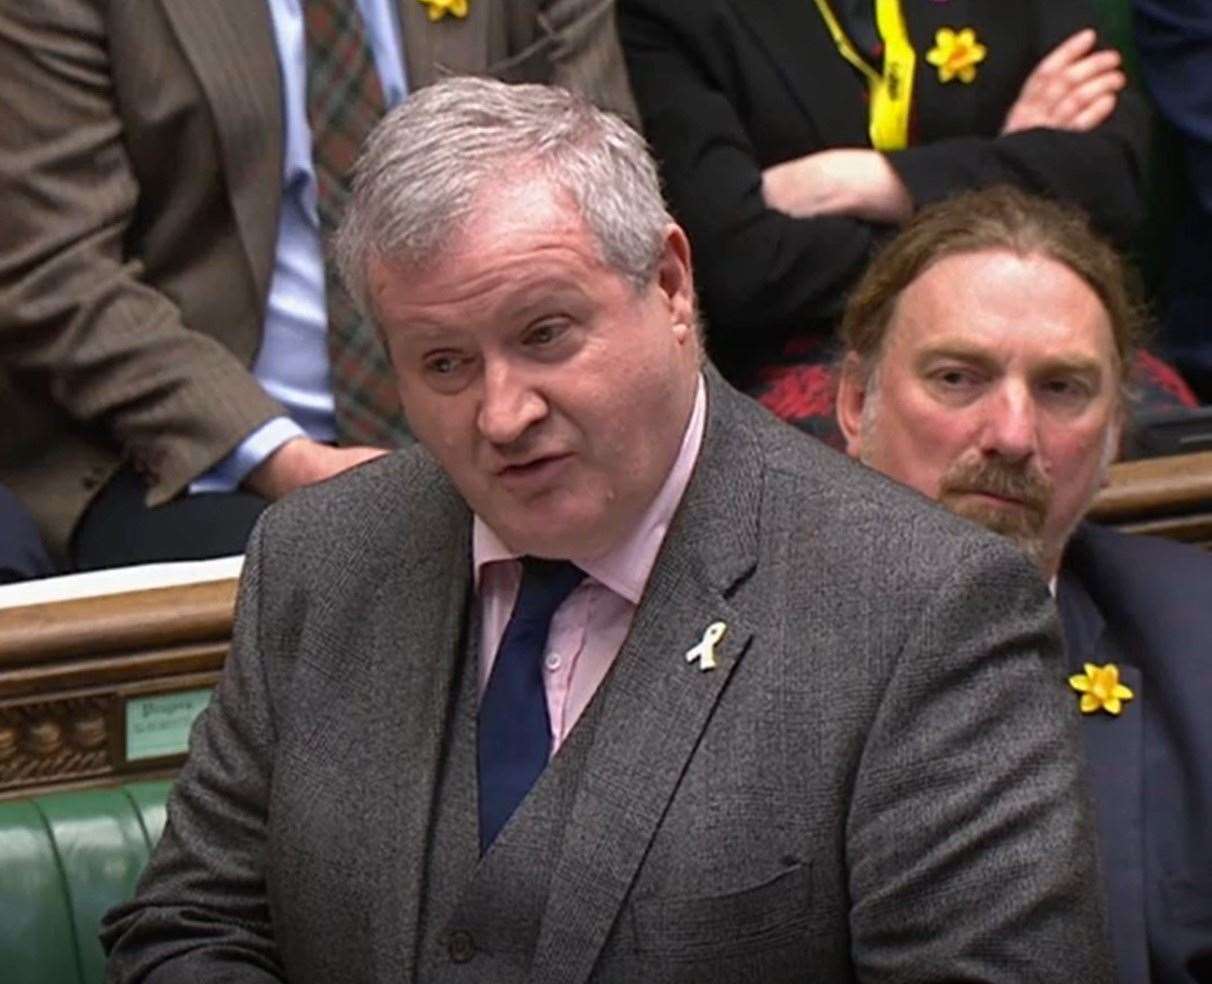 SNP Westminster leader Ian Blackford said the Prime Minister should come clean on what he knew about Dominic Cummings’ travels (House of Commons/PA)